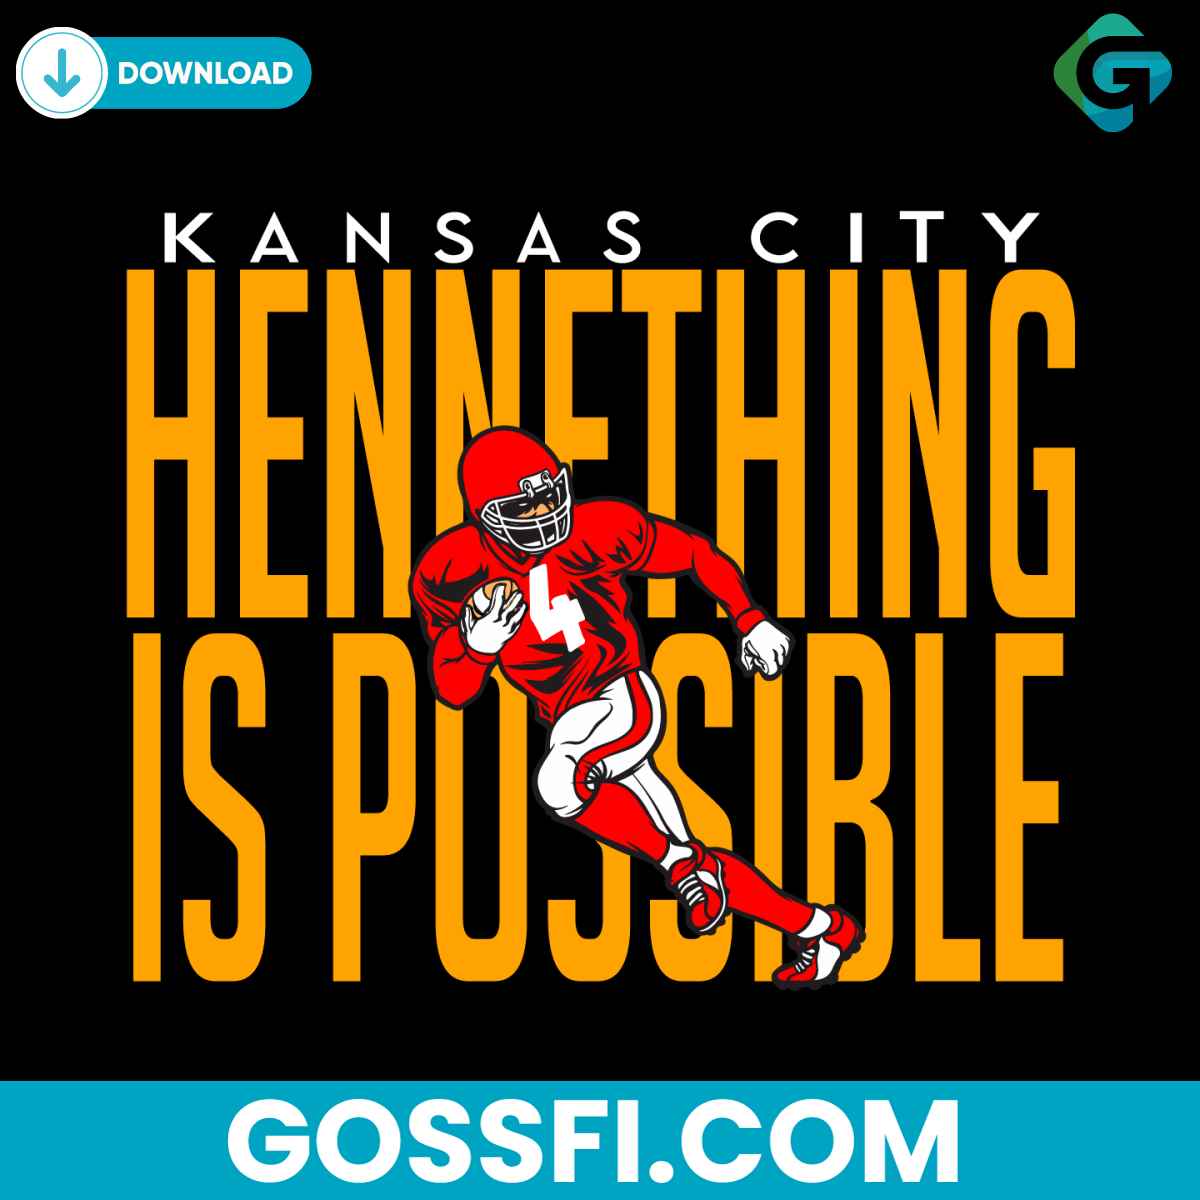 kansas-city-hennething-is-possible-svg